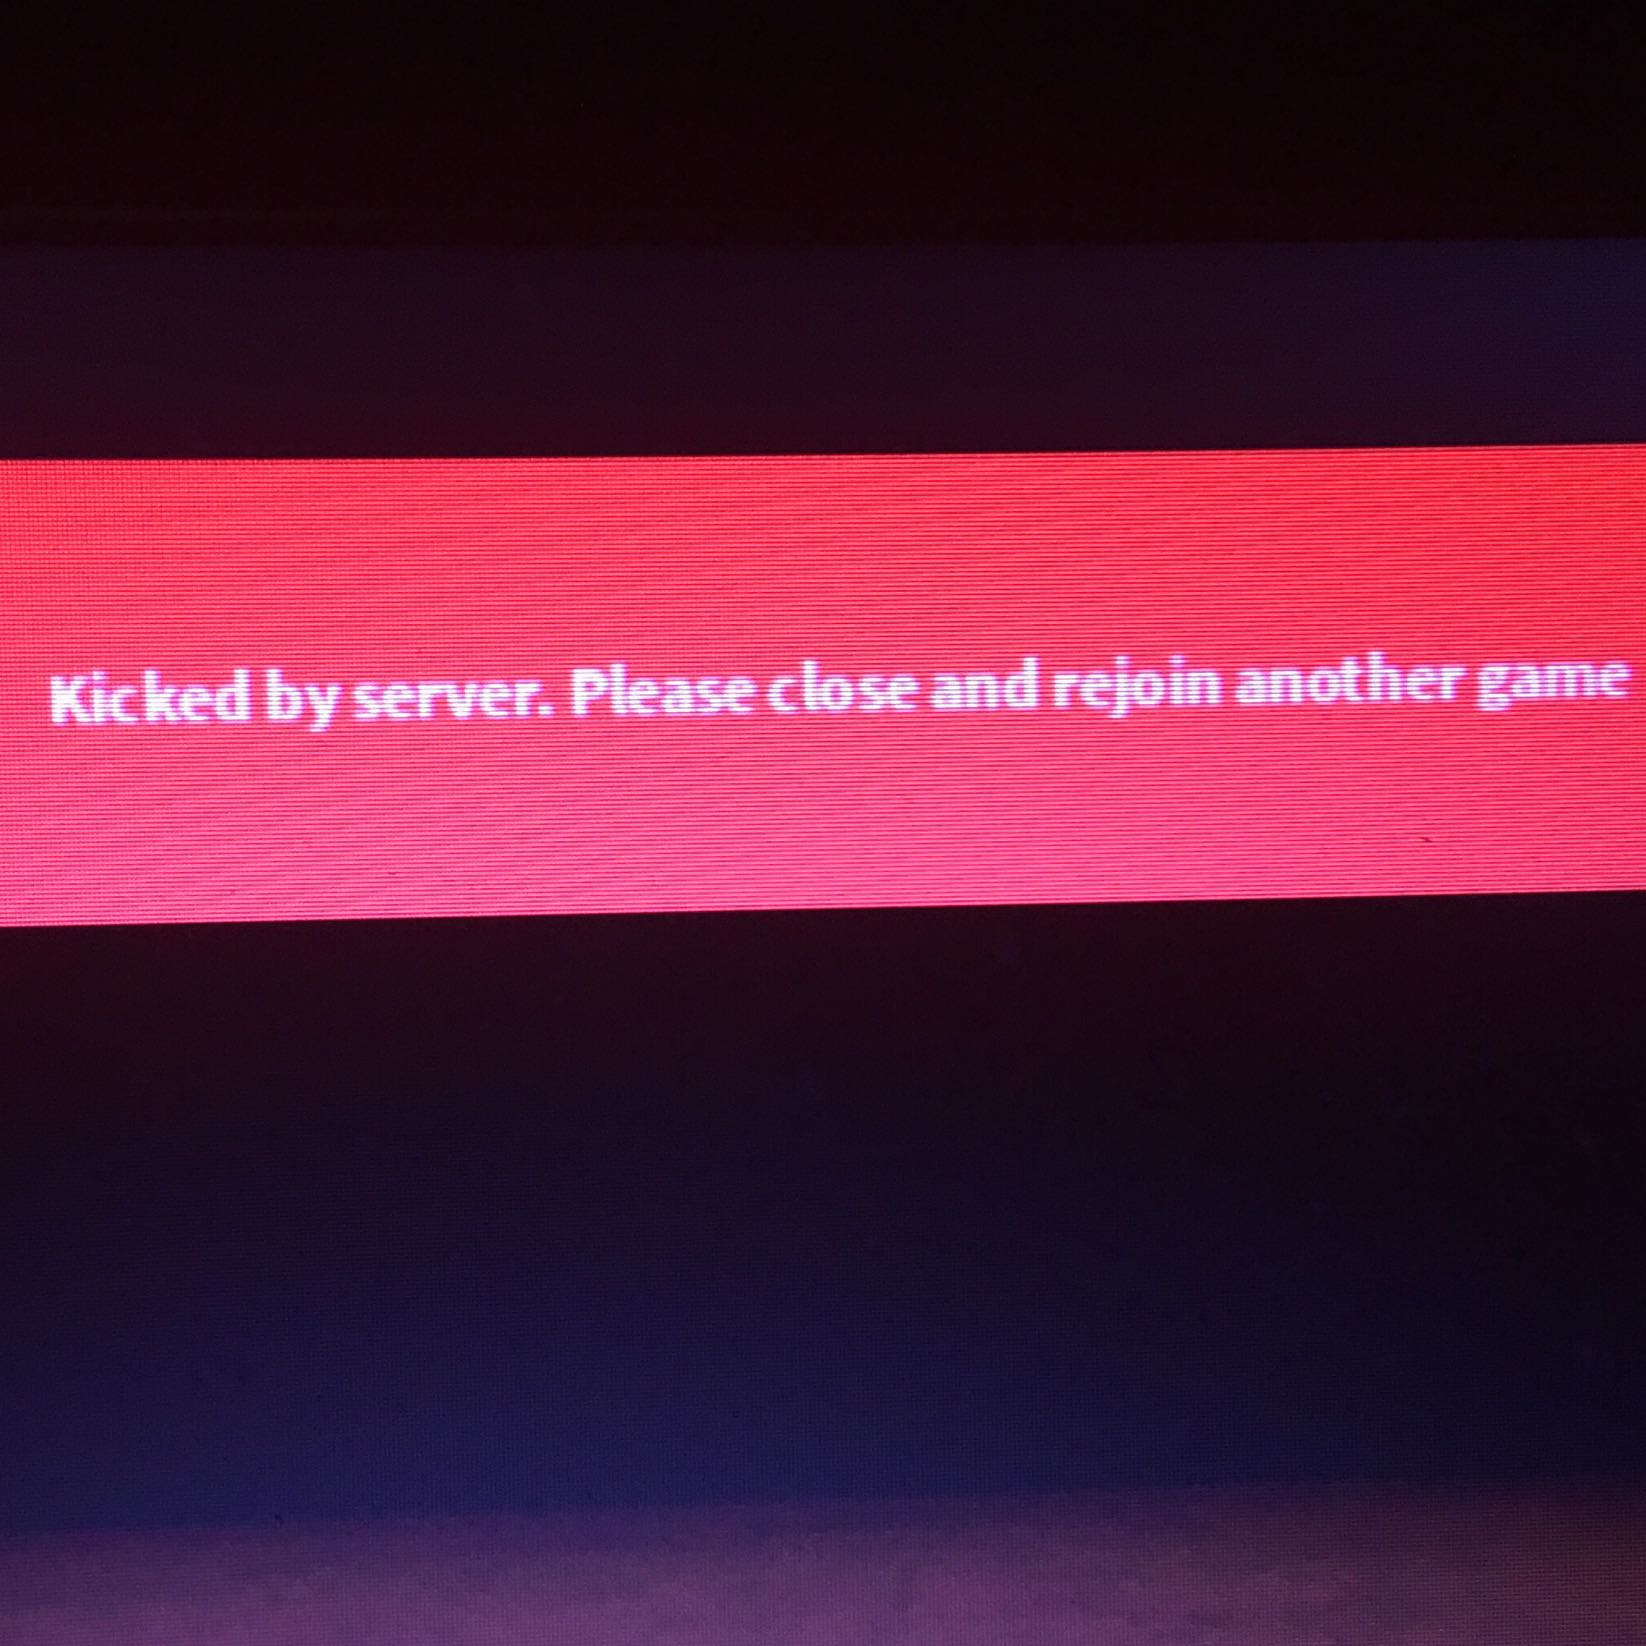 roblox kicked by server please close and rejoin